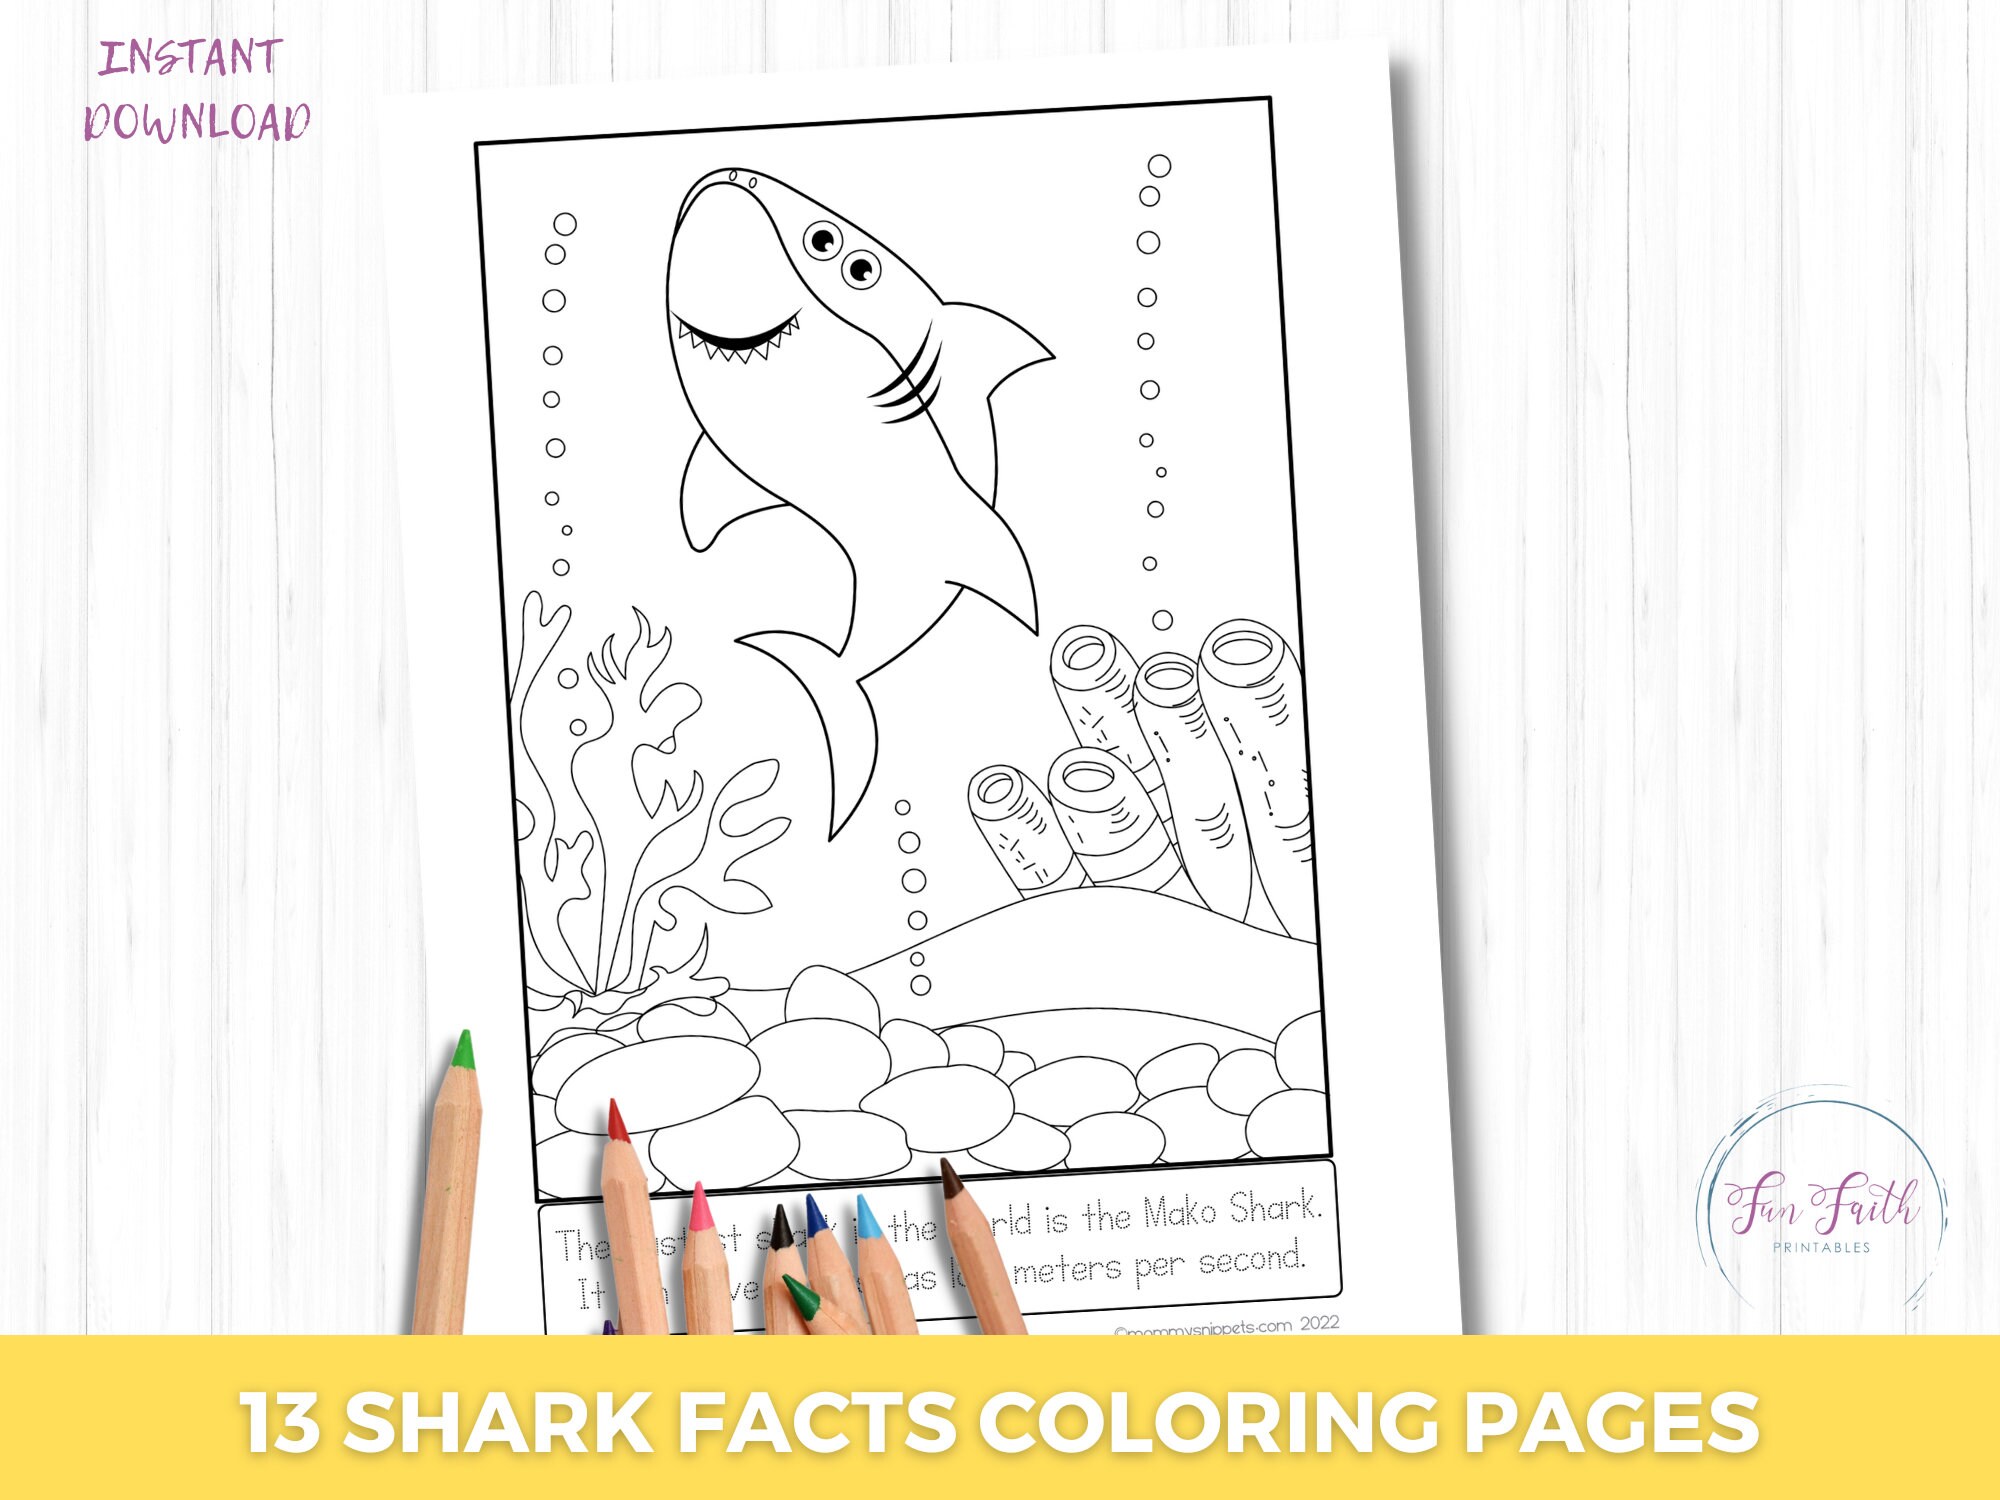 Facts about sharks coloring pages printable coloring sheets for kids coloring book for shark week shark birthday party coloring pages